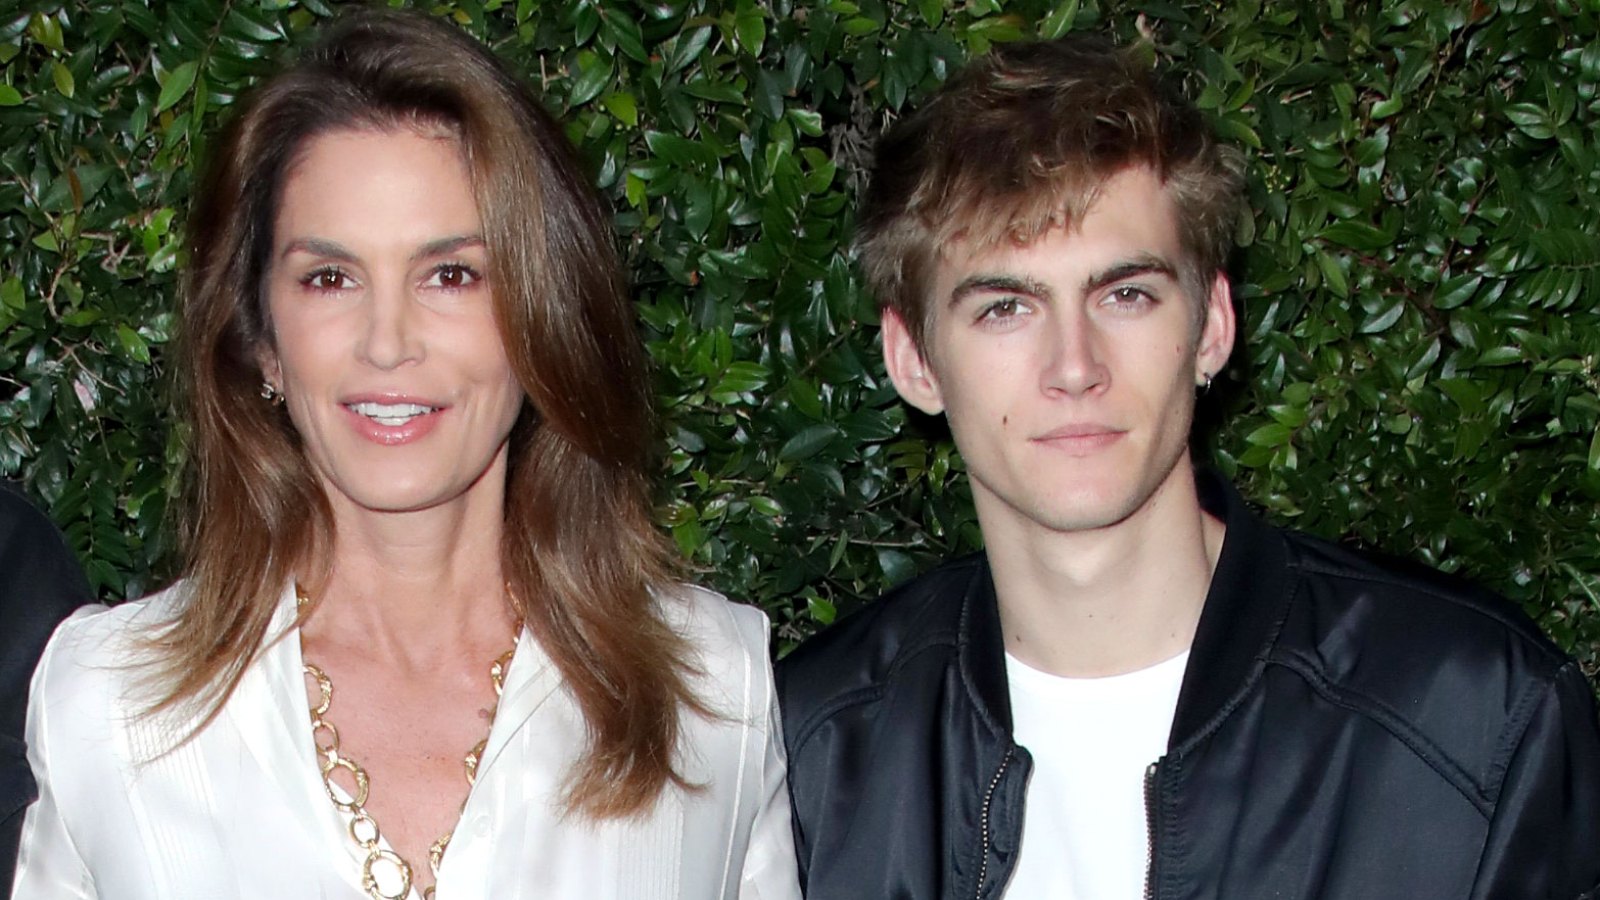 Cindy Crawford's Son Presley Gerber Gets Face Tattoo That Says 'Misunderstood'